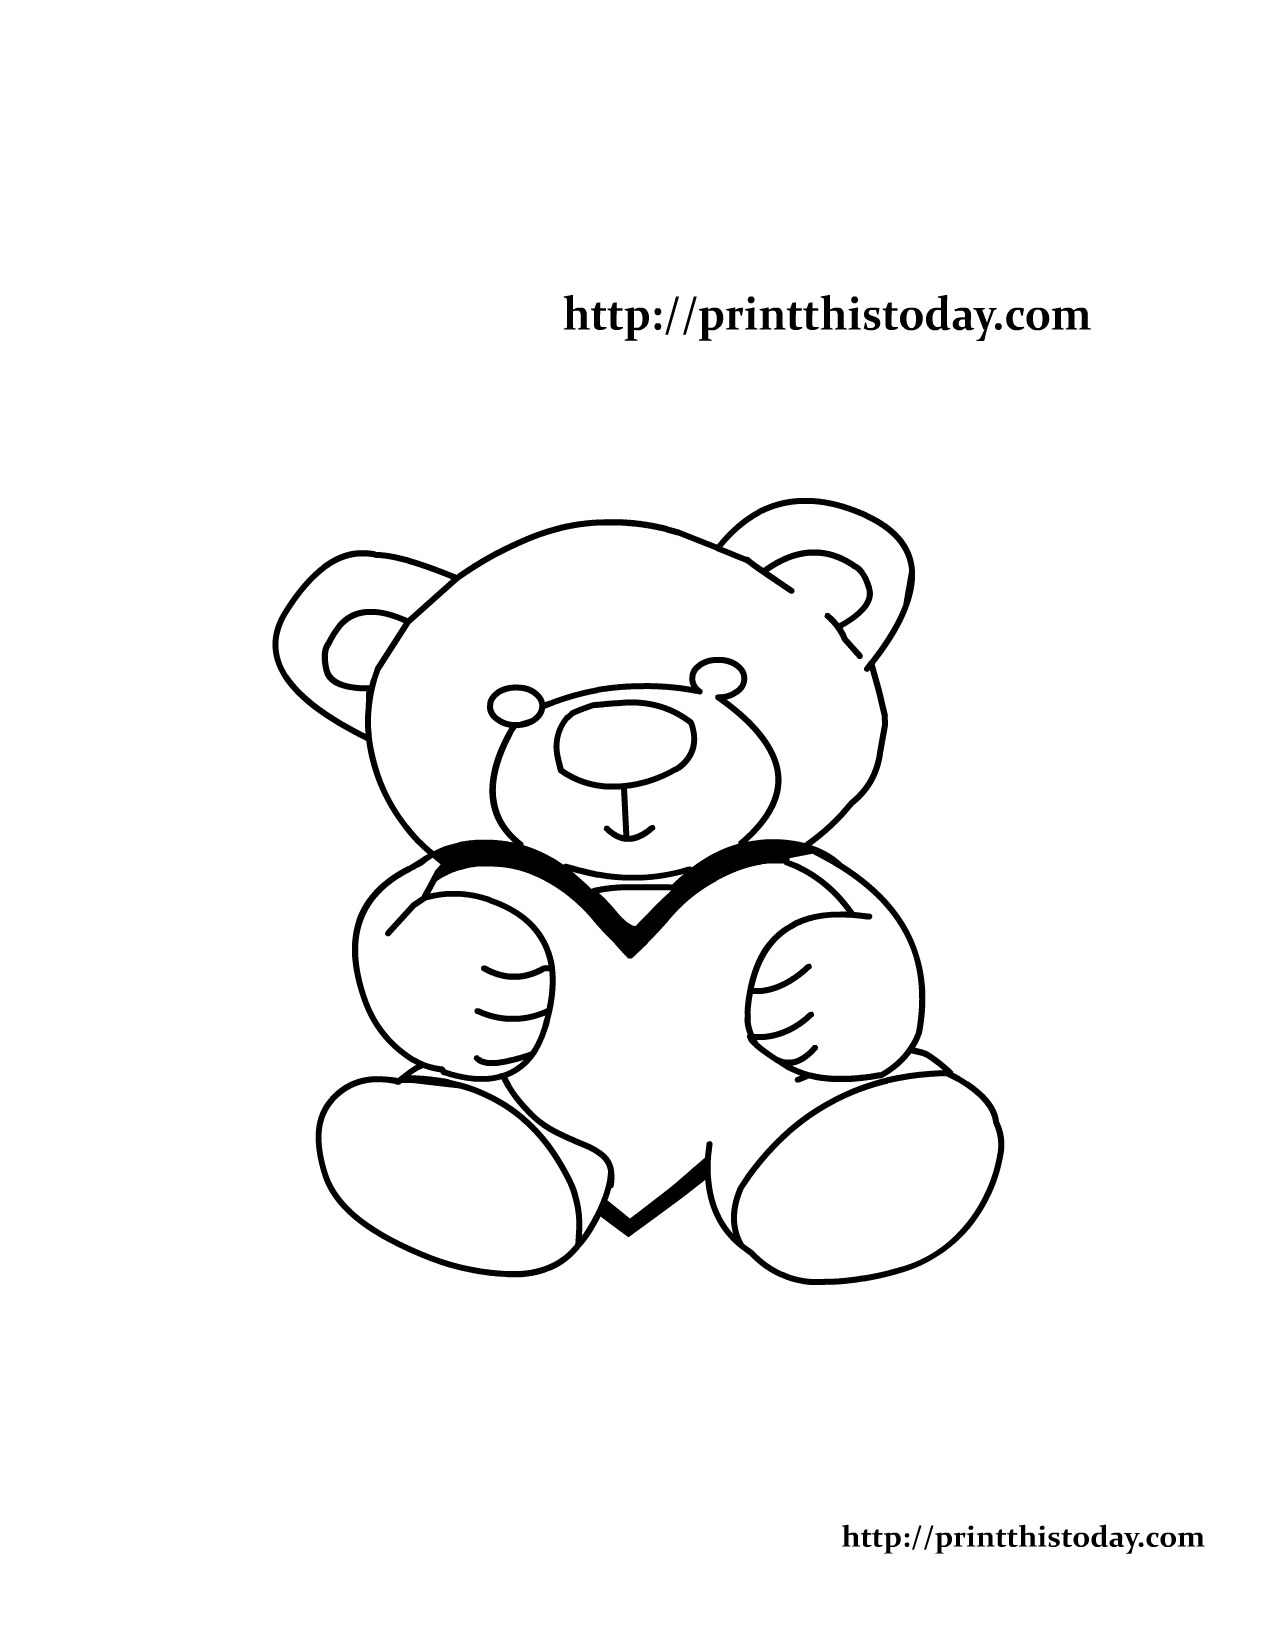 Coloring Page with Teddy Bear Holding a Heart